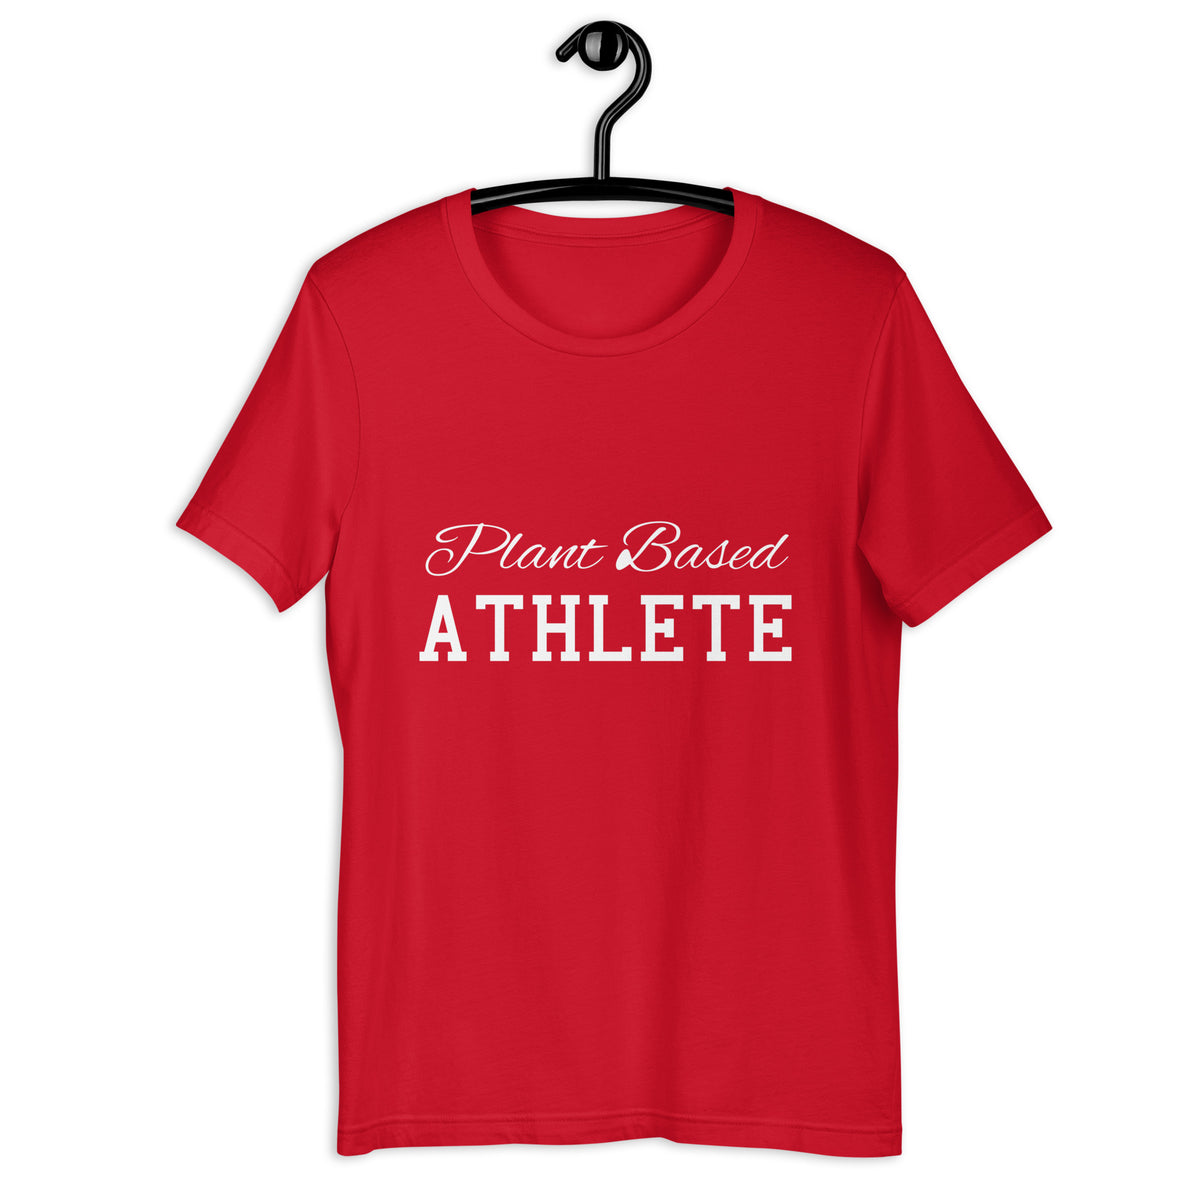 PLANT BASED ATHLETE Colored t-shirt